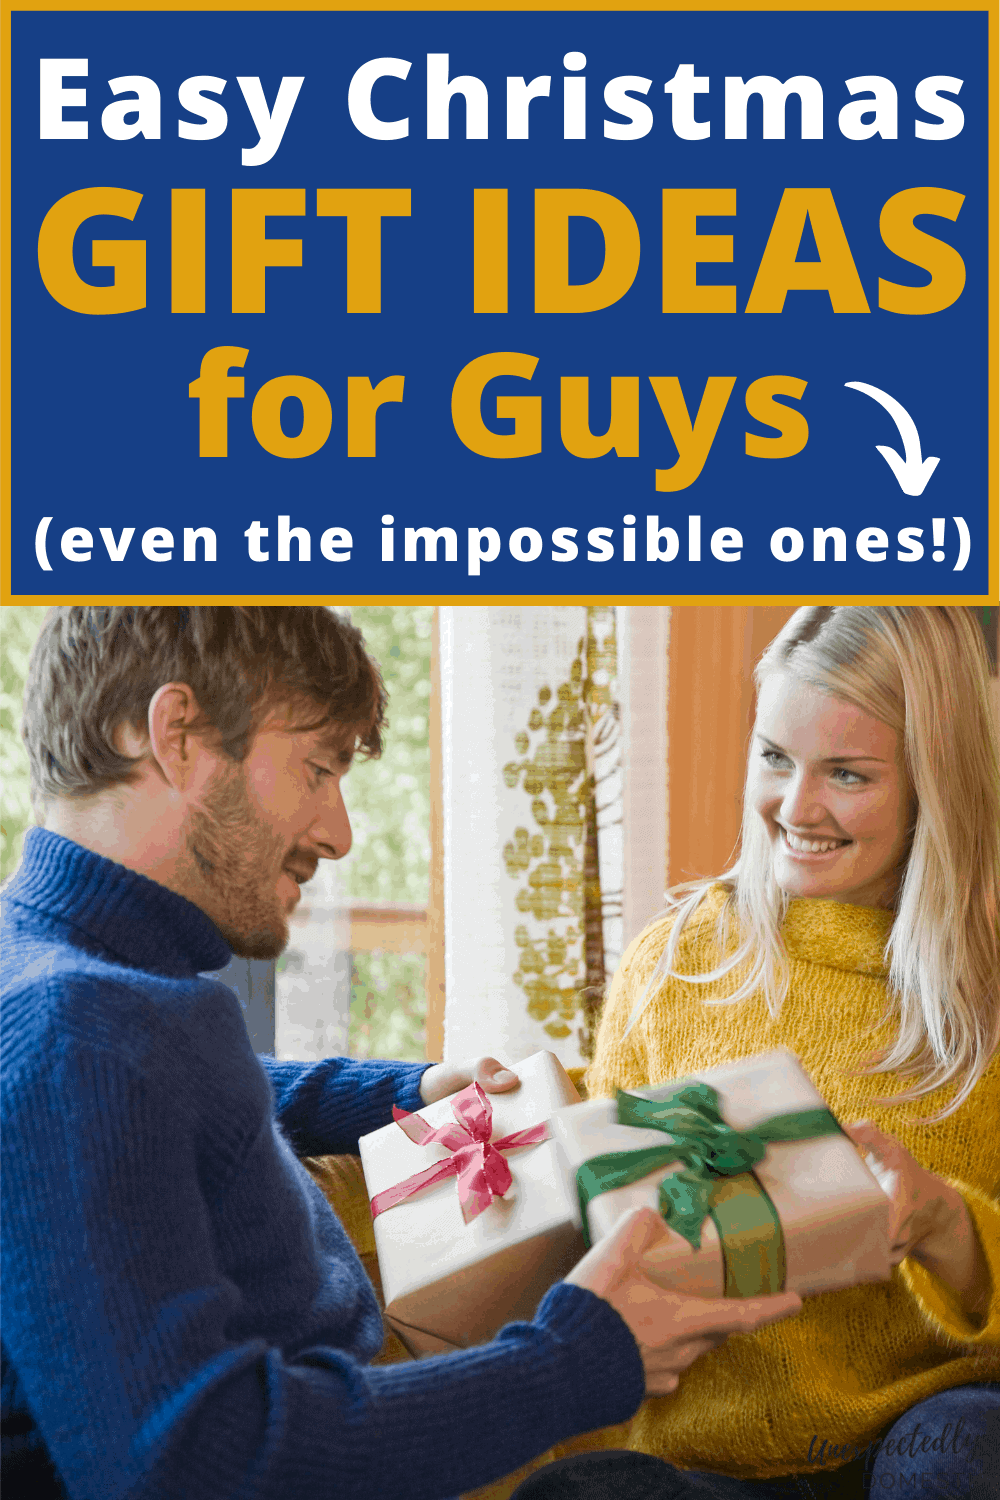 Gift ideas for guys! These creative, unique, and thoughtful gifts for men making shopping for your favorite guy easier than ever.